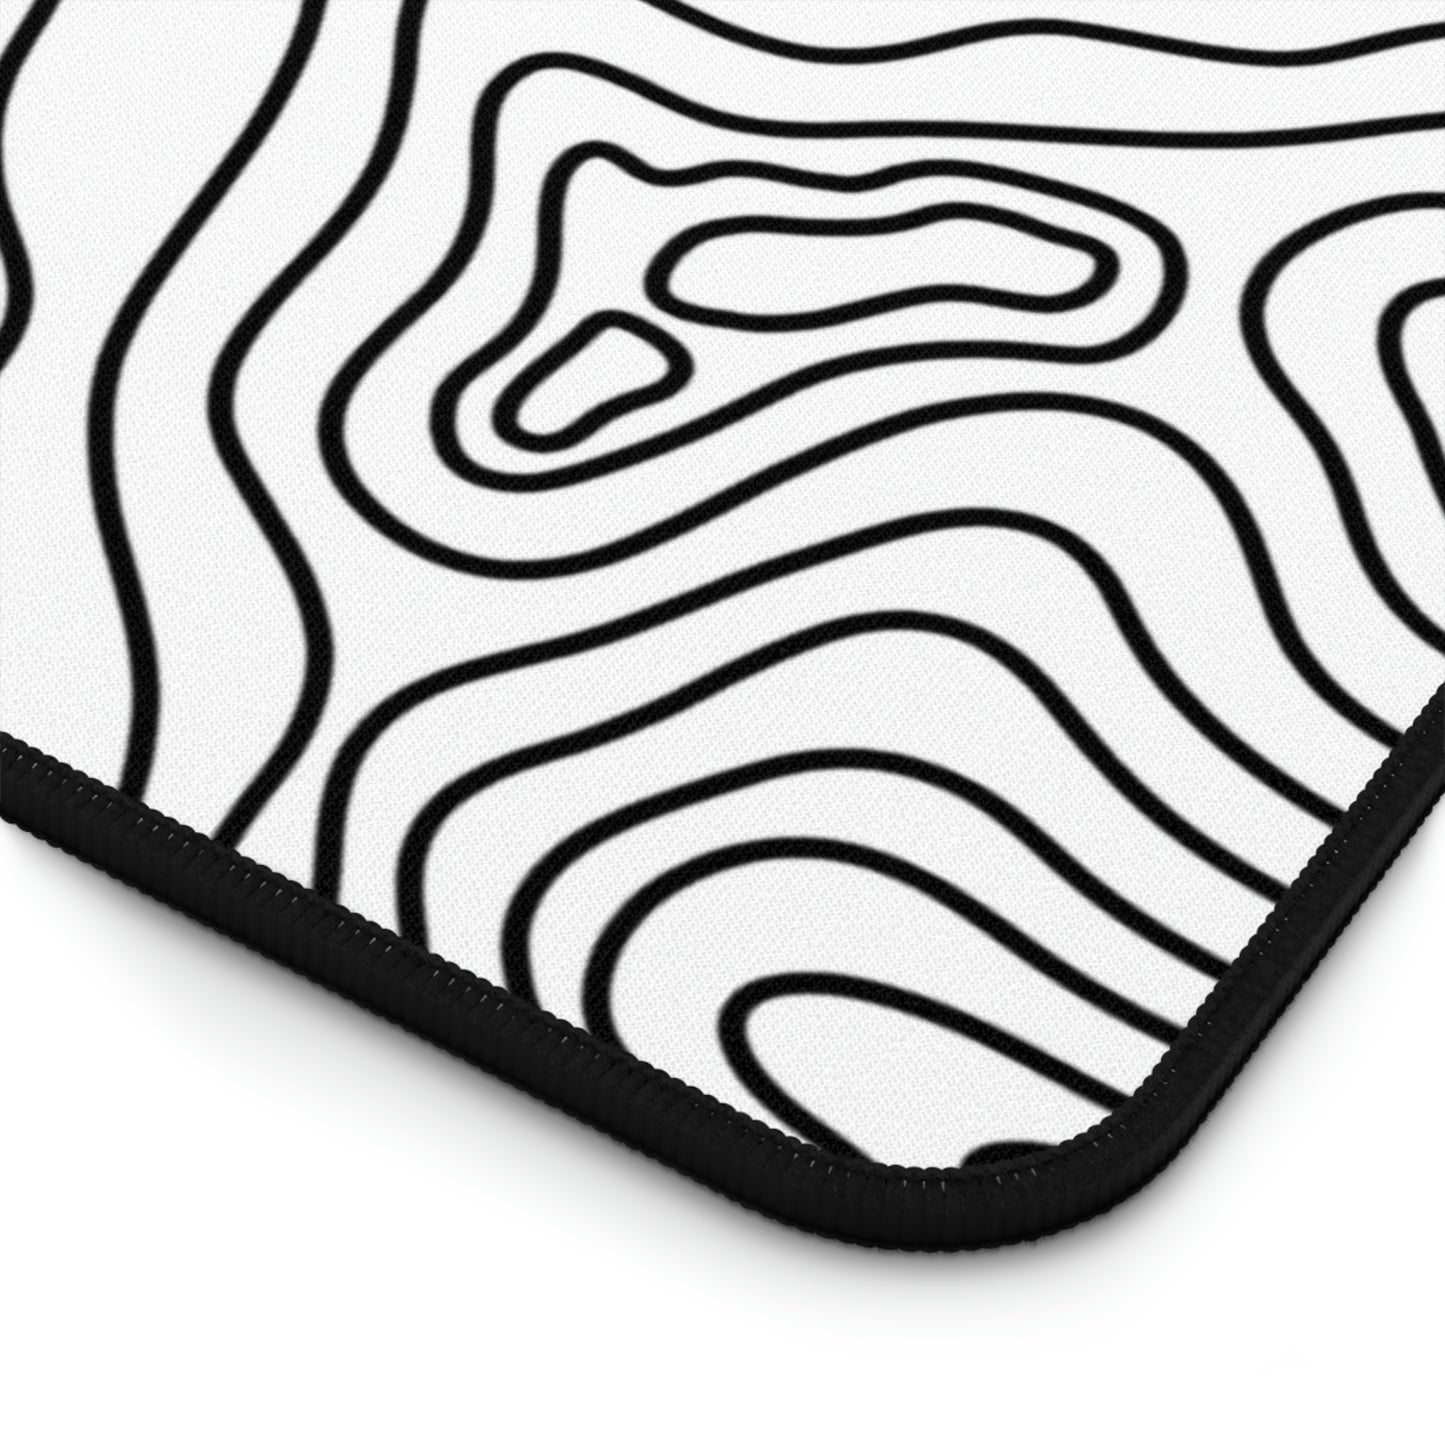 The bottom right corner of a 31" x 15.5" white topographic desk mat. The desk mat is white with black topographic lines.